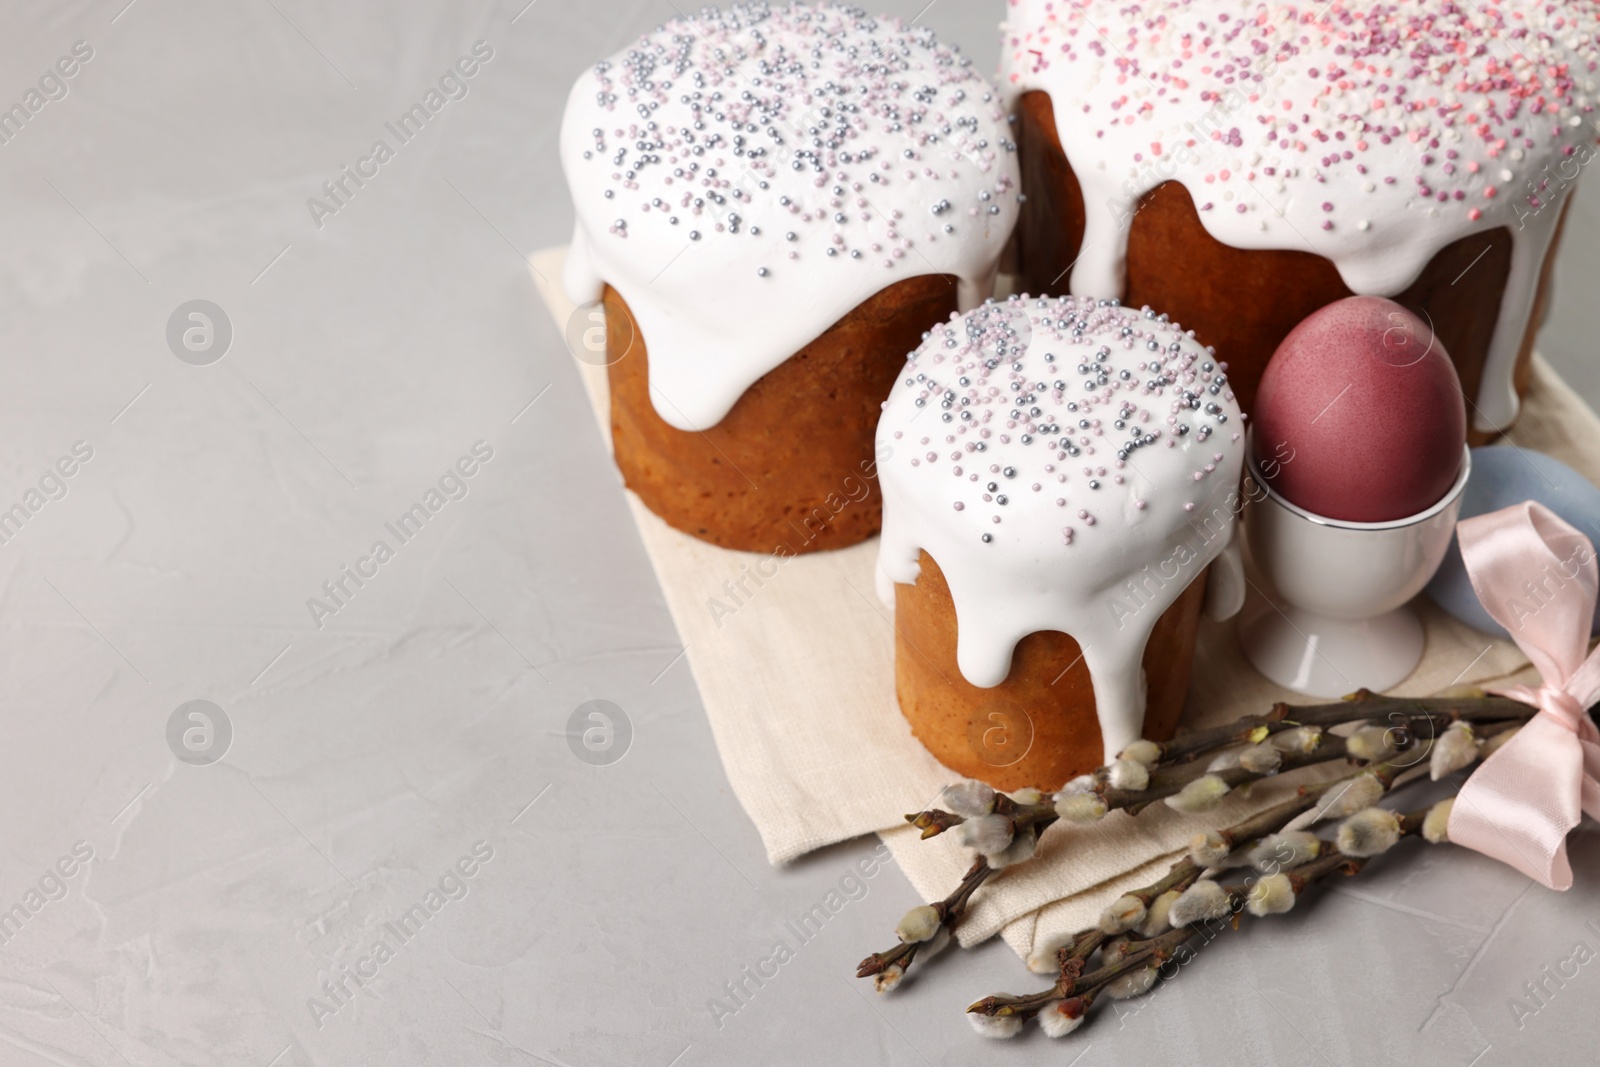 Photo of Tasty Easter cakes, decorated eggs and willow branches on grey table. Space for text